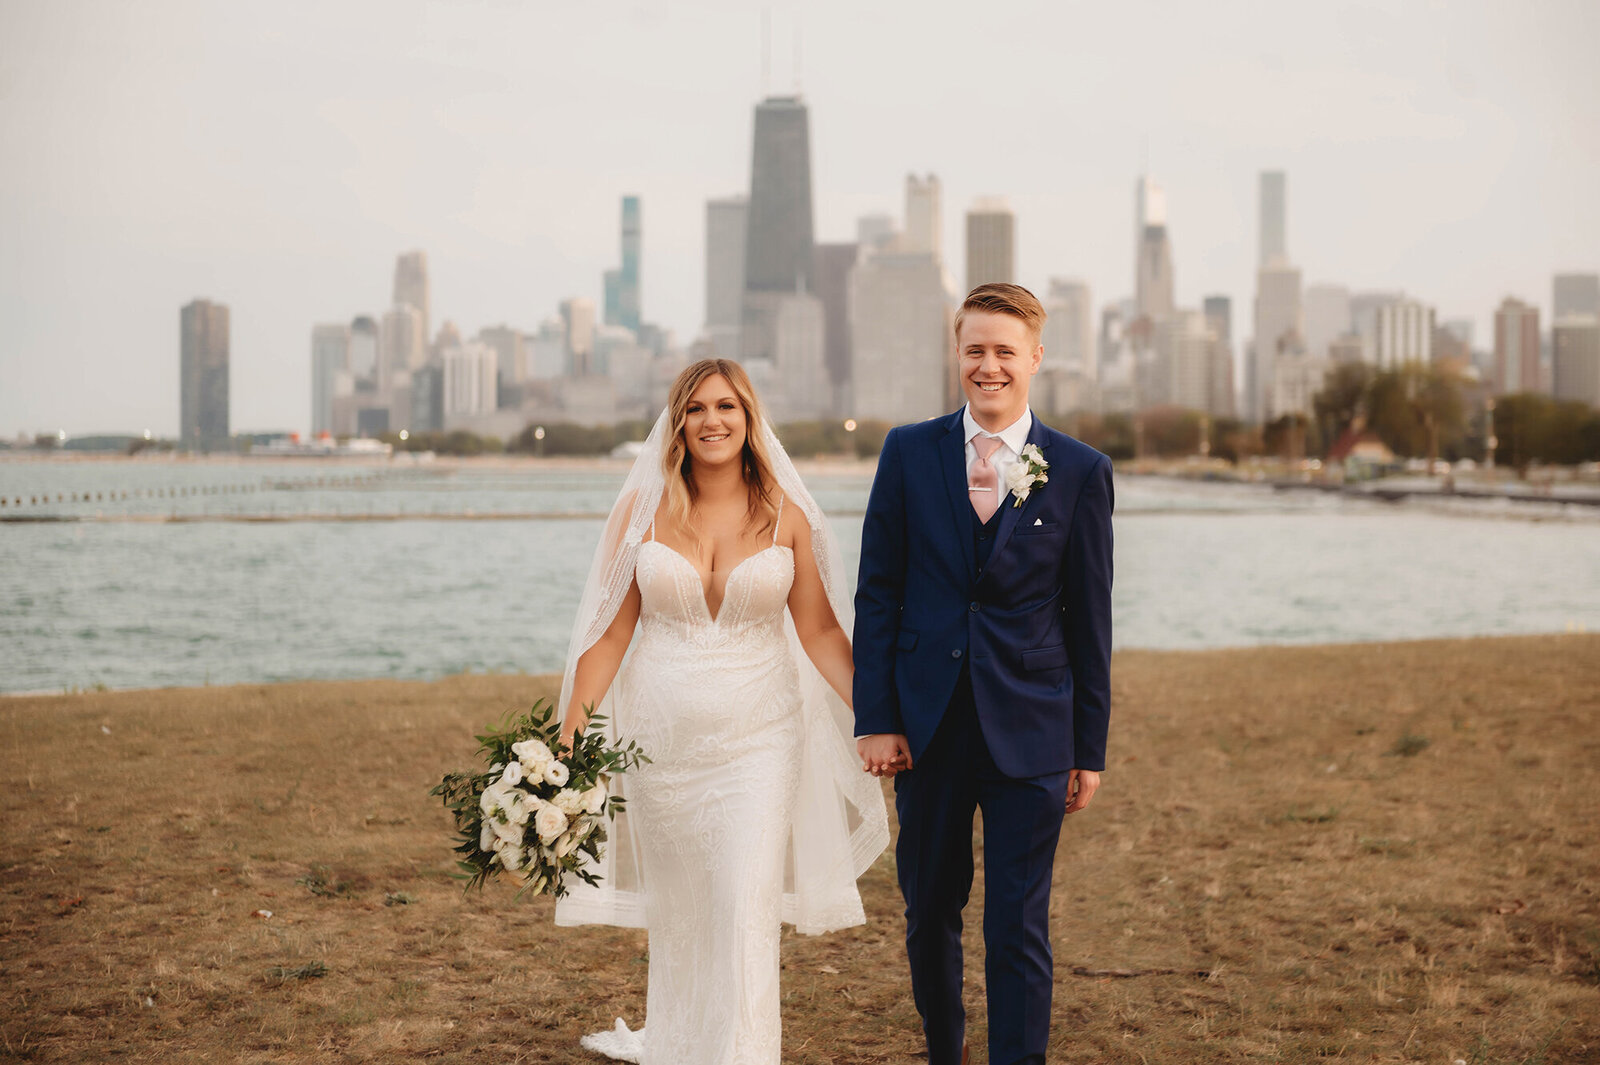 Bride & Groom pose for newlywed portraits after their Micro-Wedding in Chicago, IL.